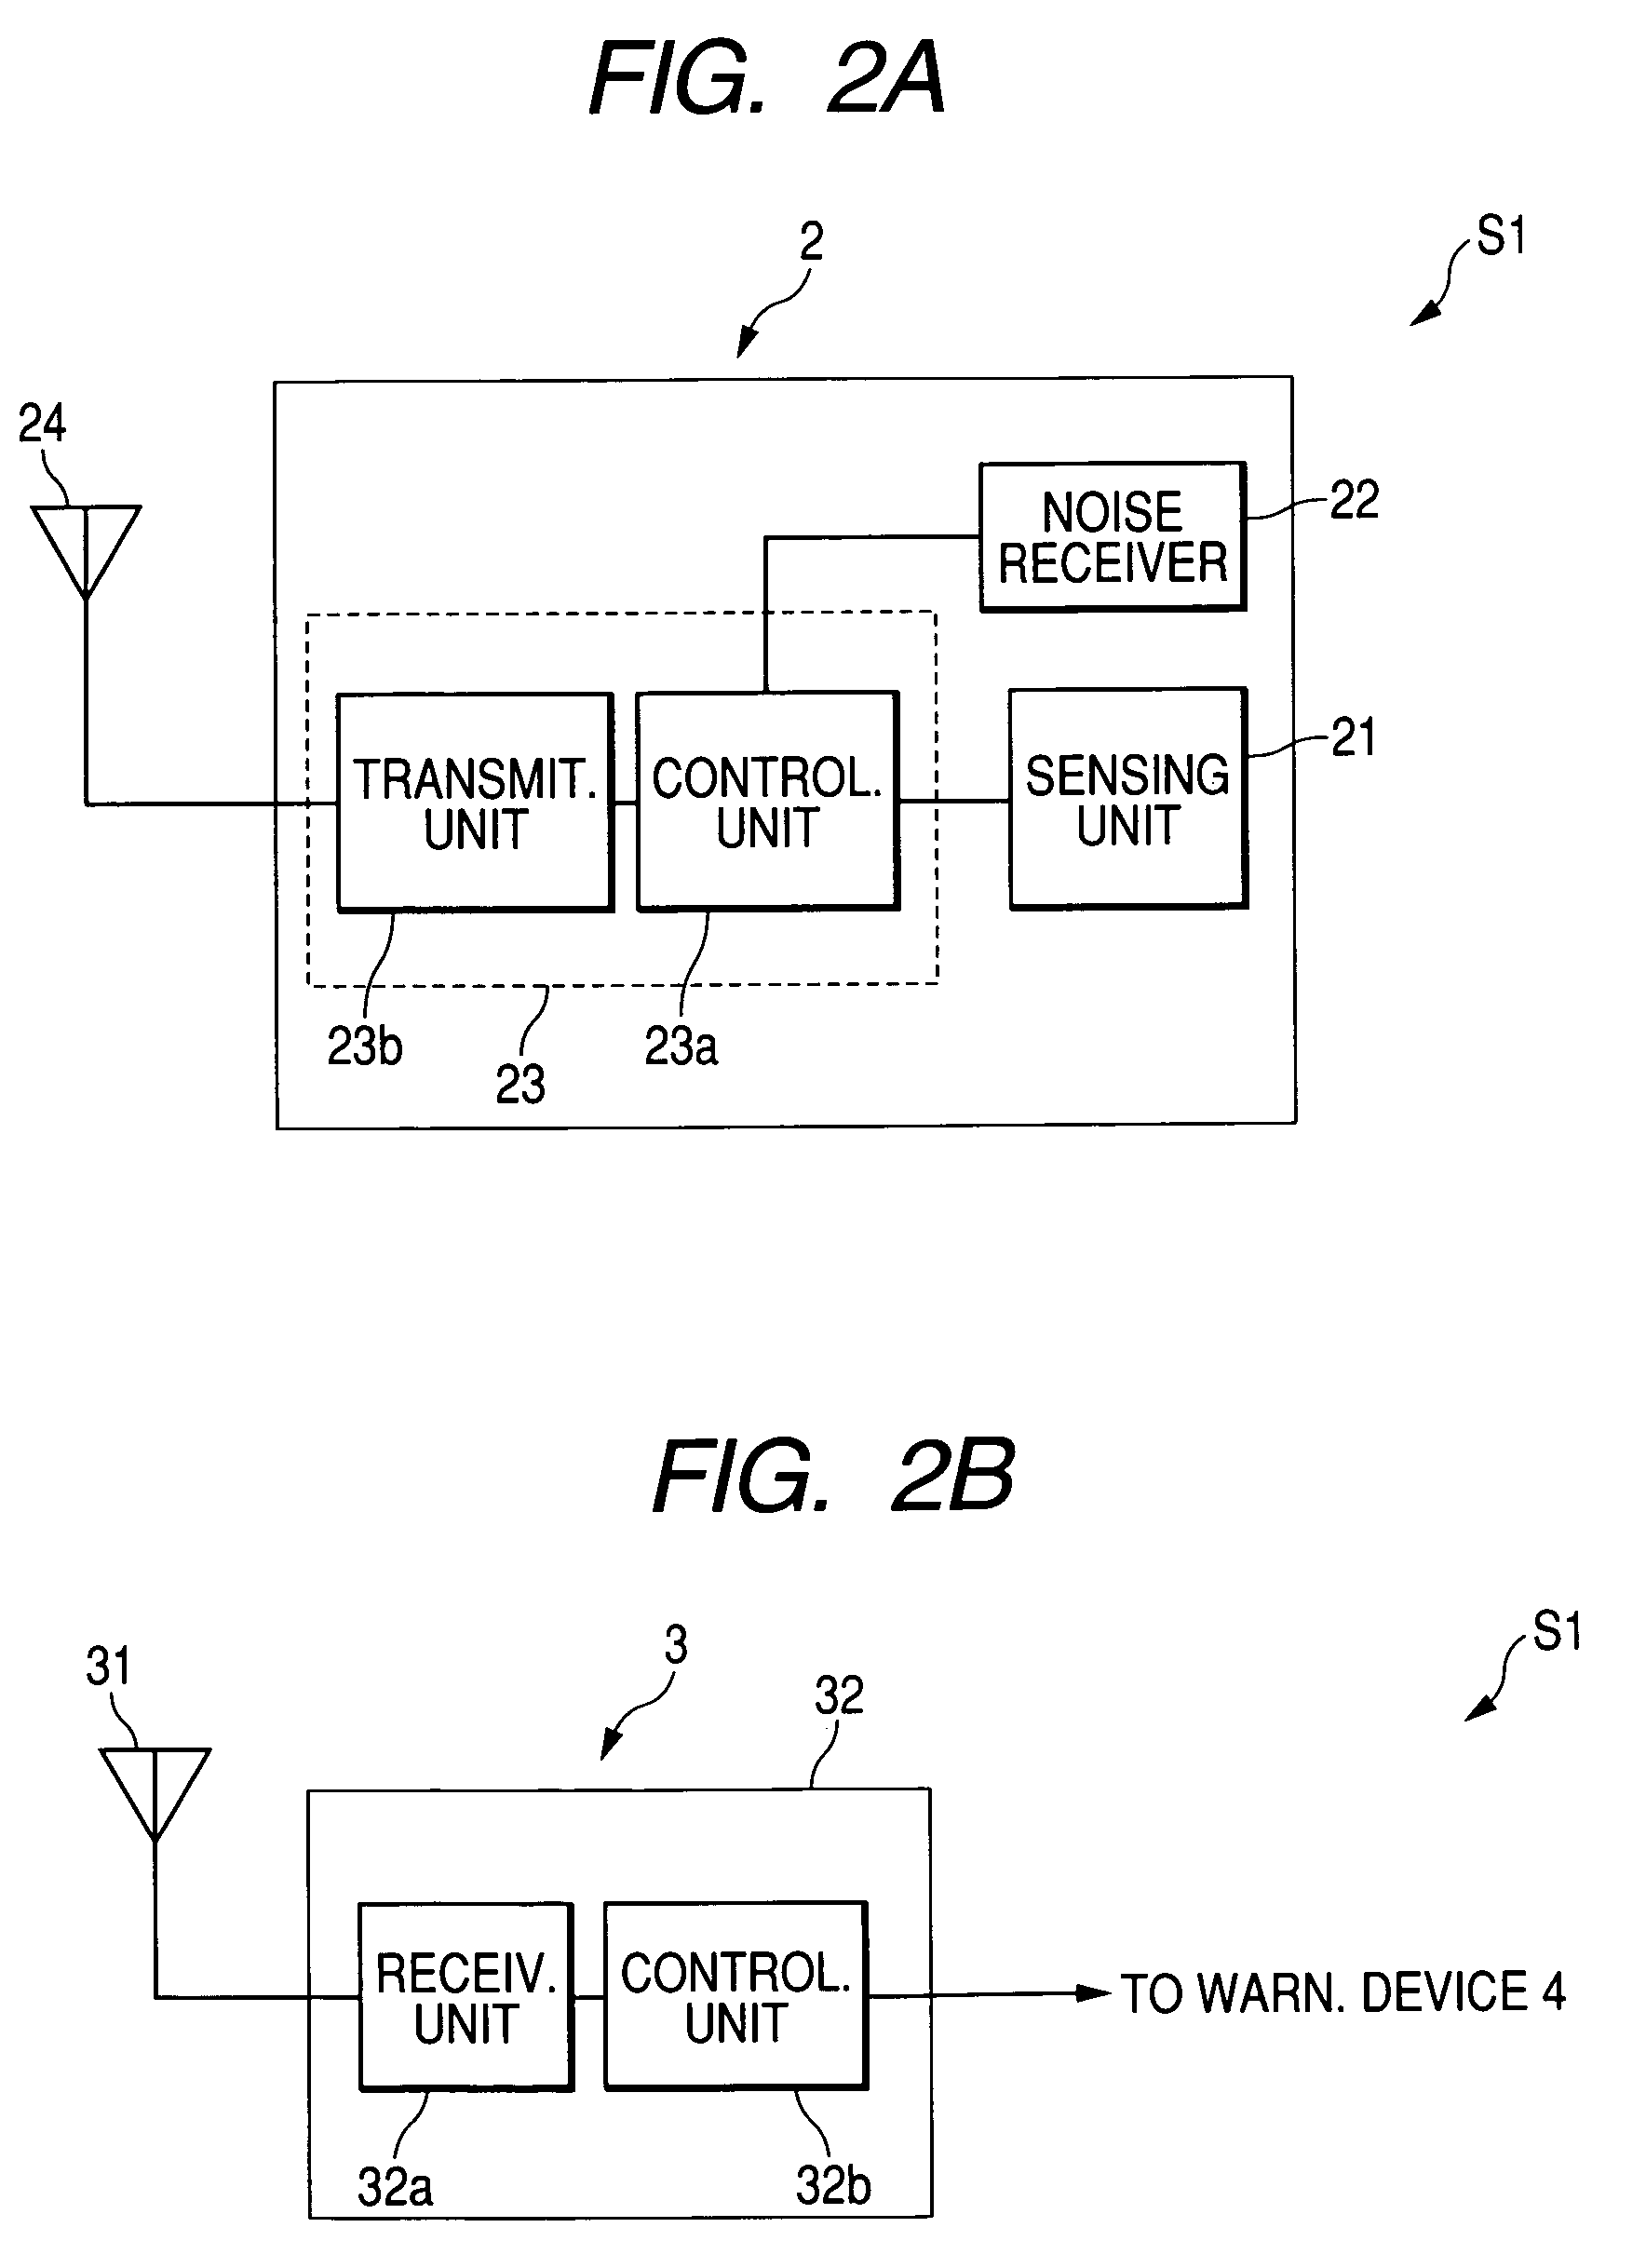 Tire inflation pressure sensing apparatus with function of detecting tire location